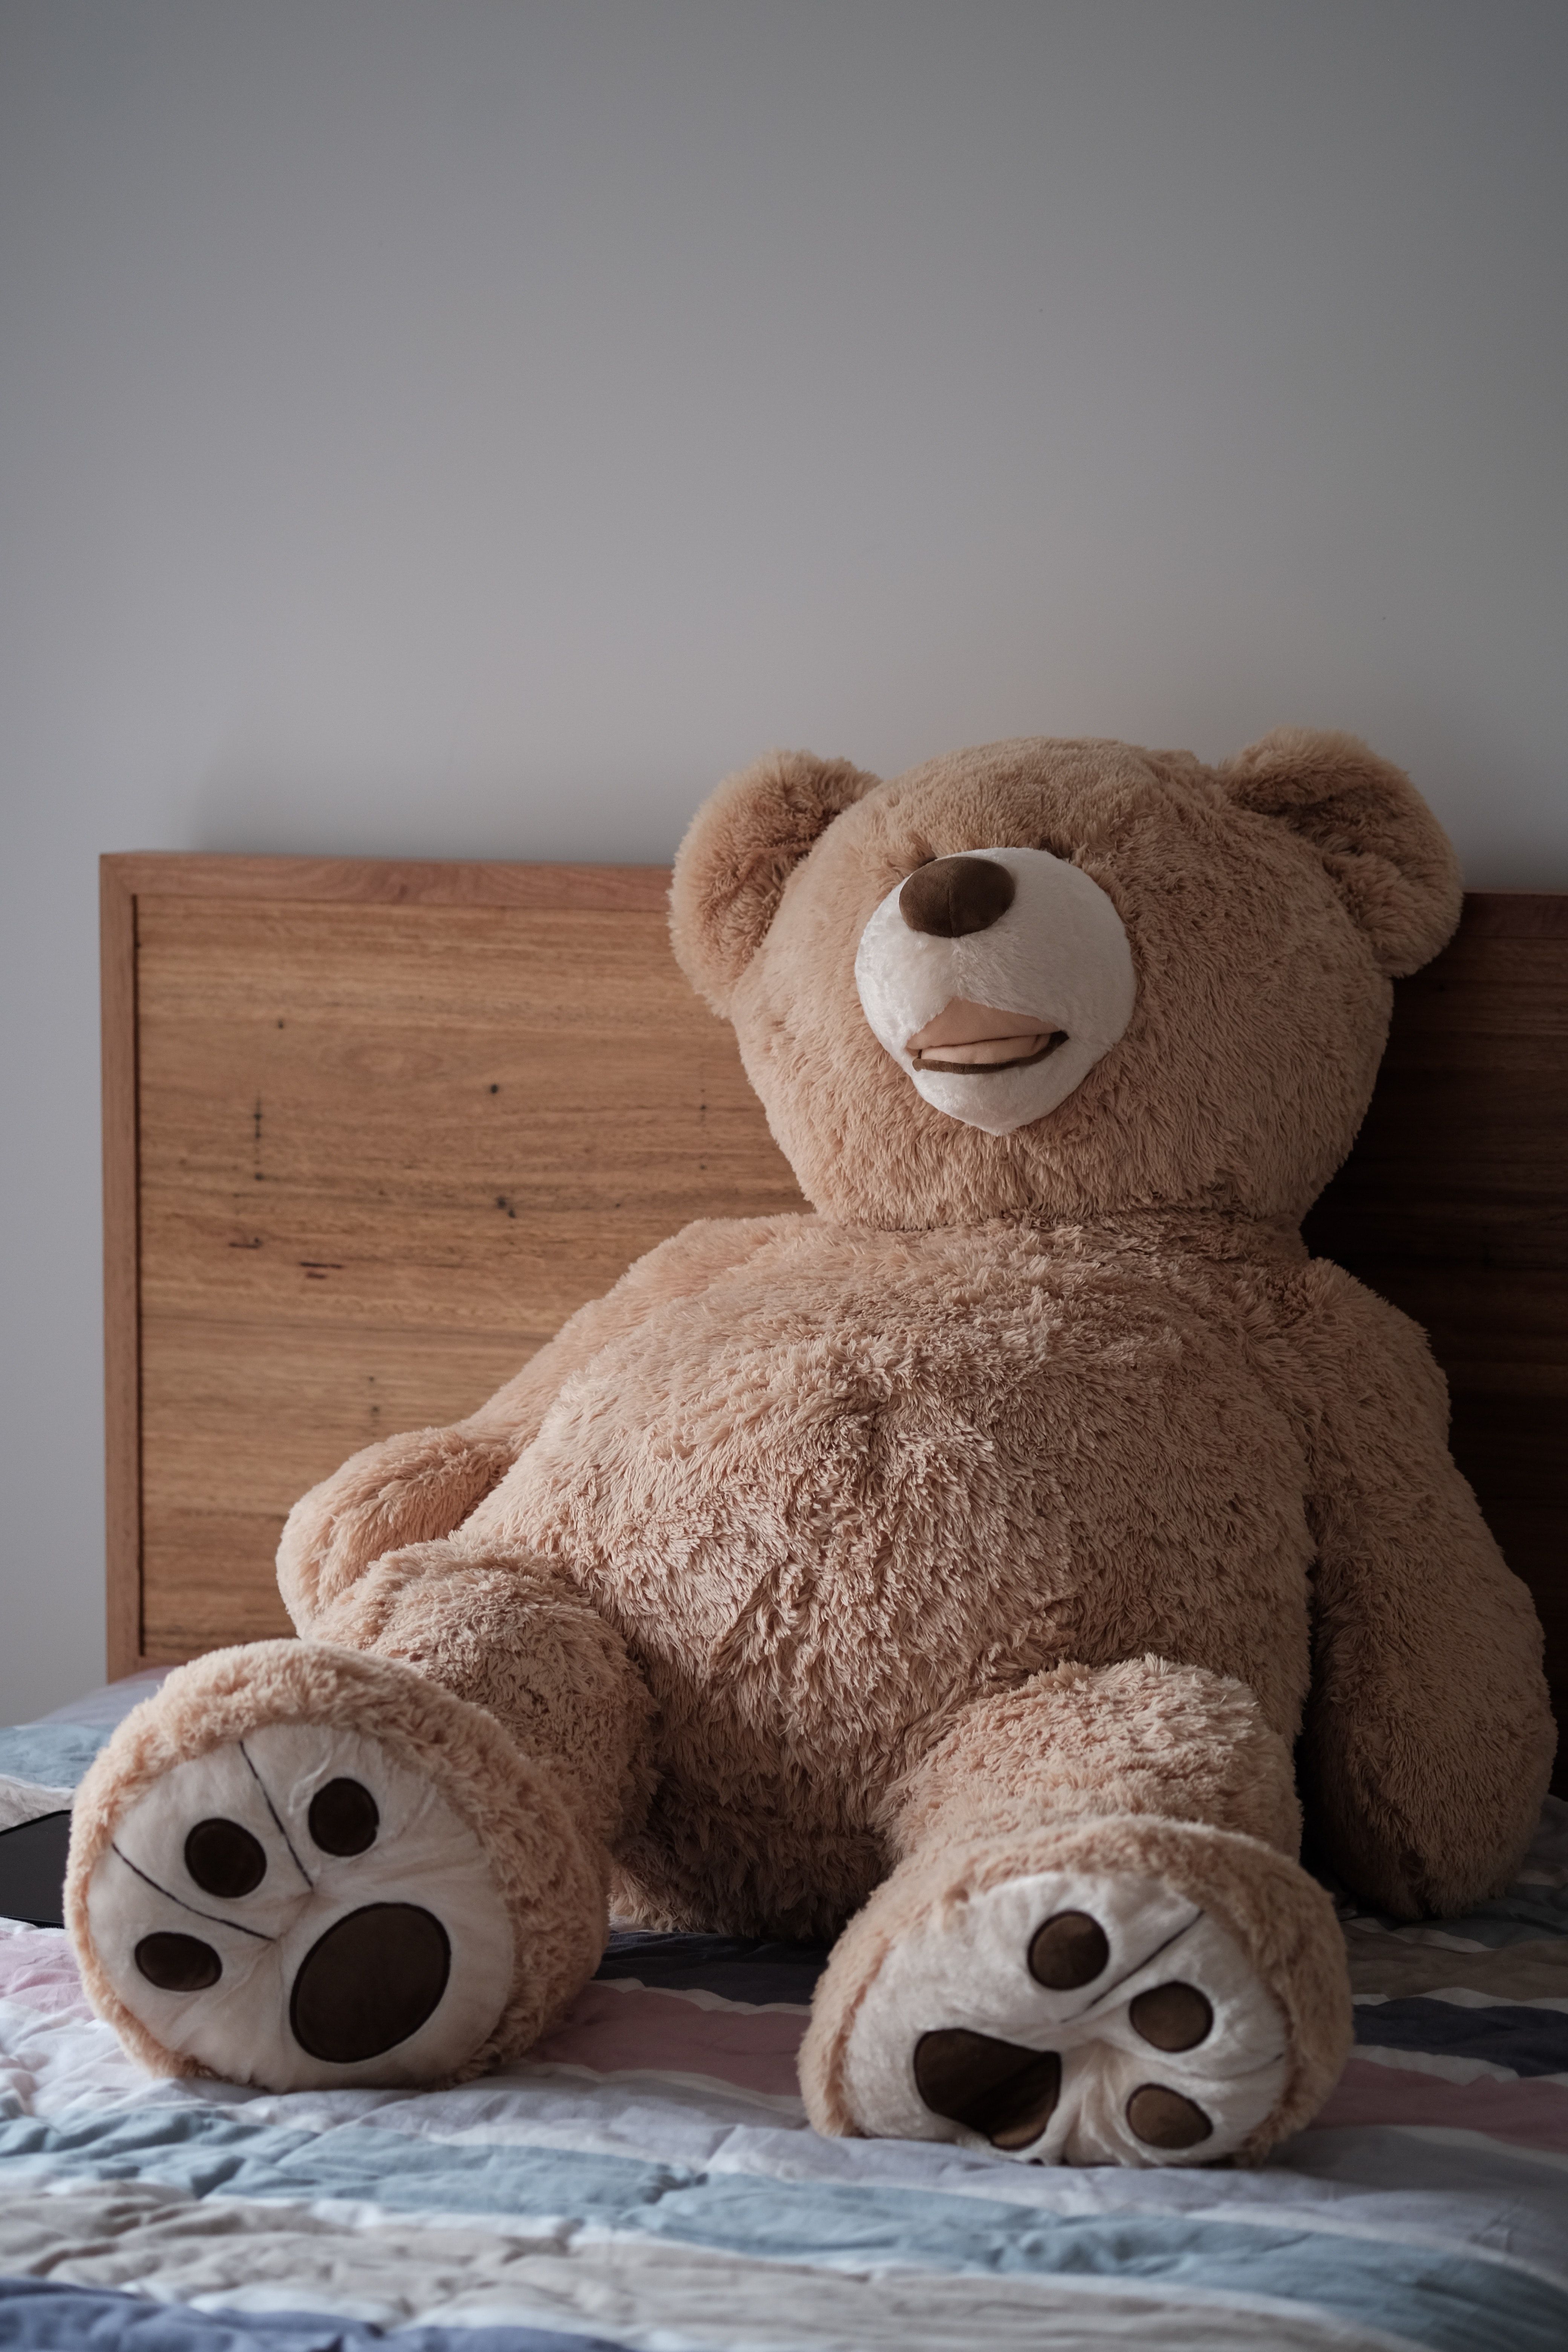 A large teddy bear sitting on top of the bed - Teddy bear